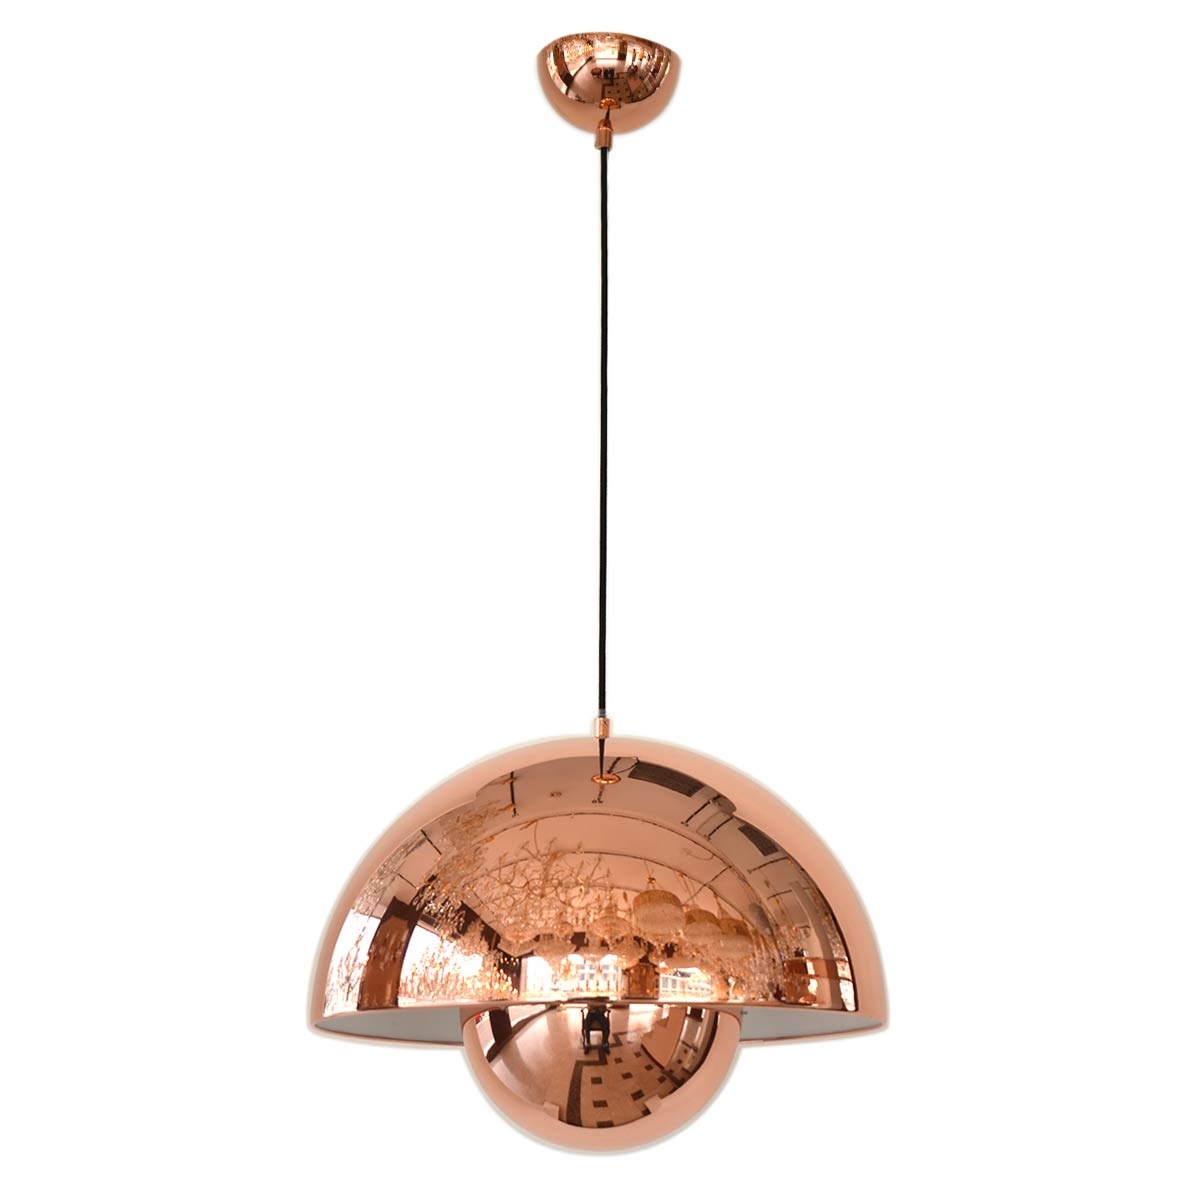  Indoor Ceiling Hanging Pendant Light, E27 Bulb Type, MD207701500, Rose Gold